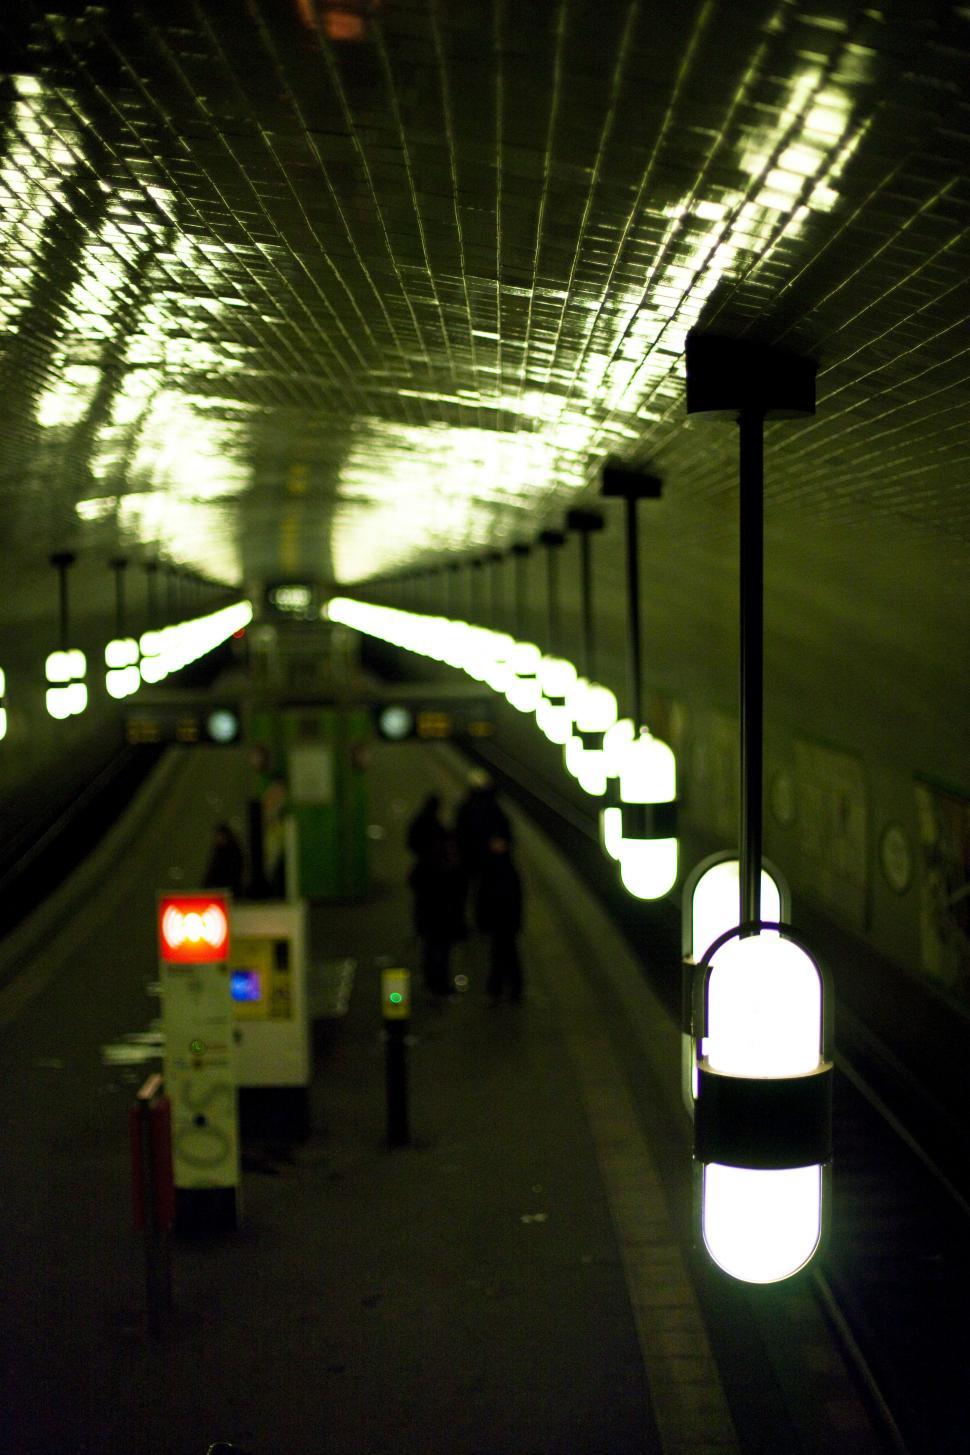 Free Image of A subway station with lights 